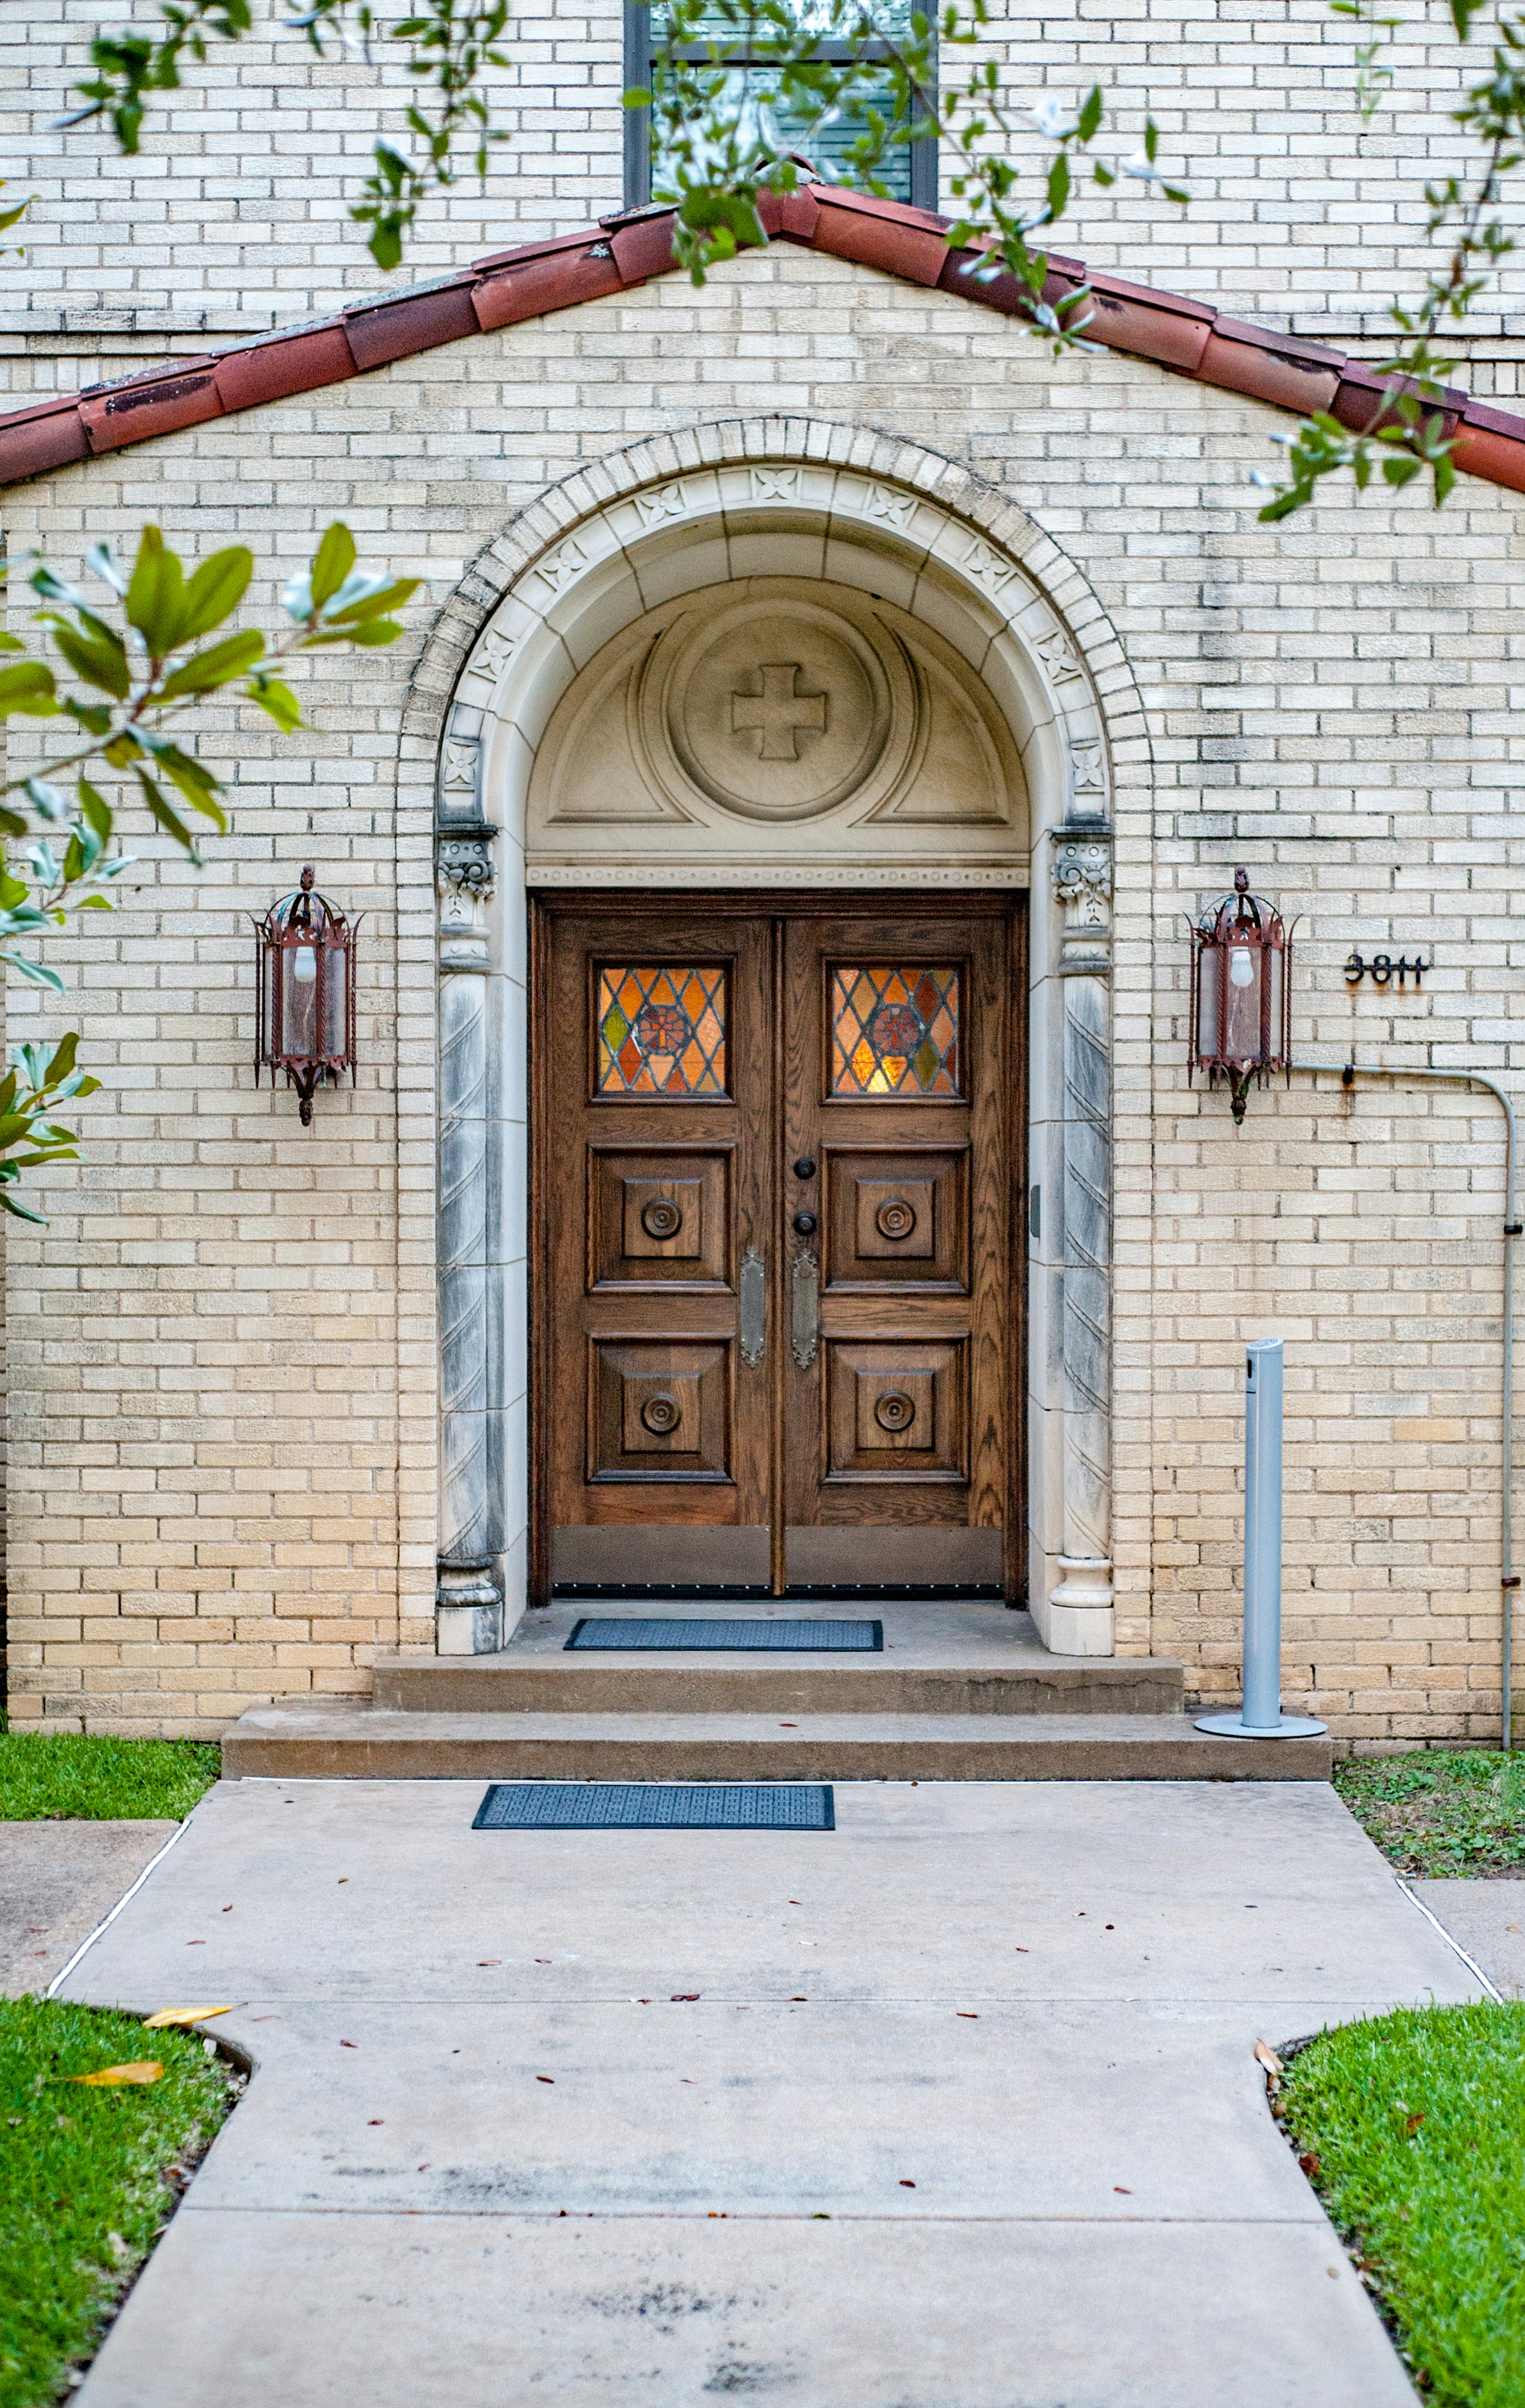 Church door from outside | Source: Unsplash